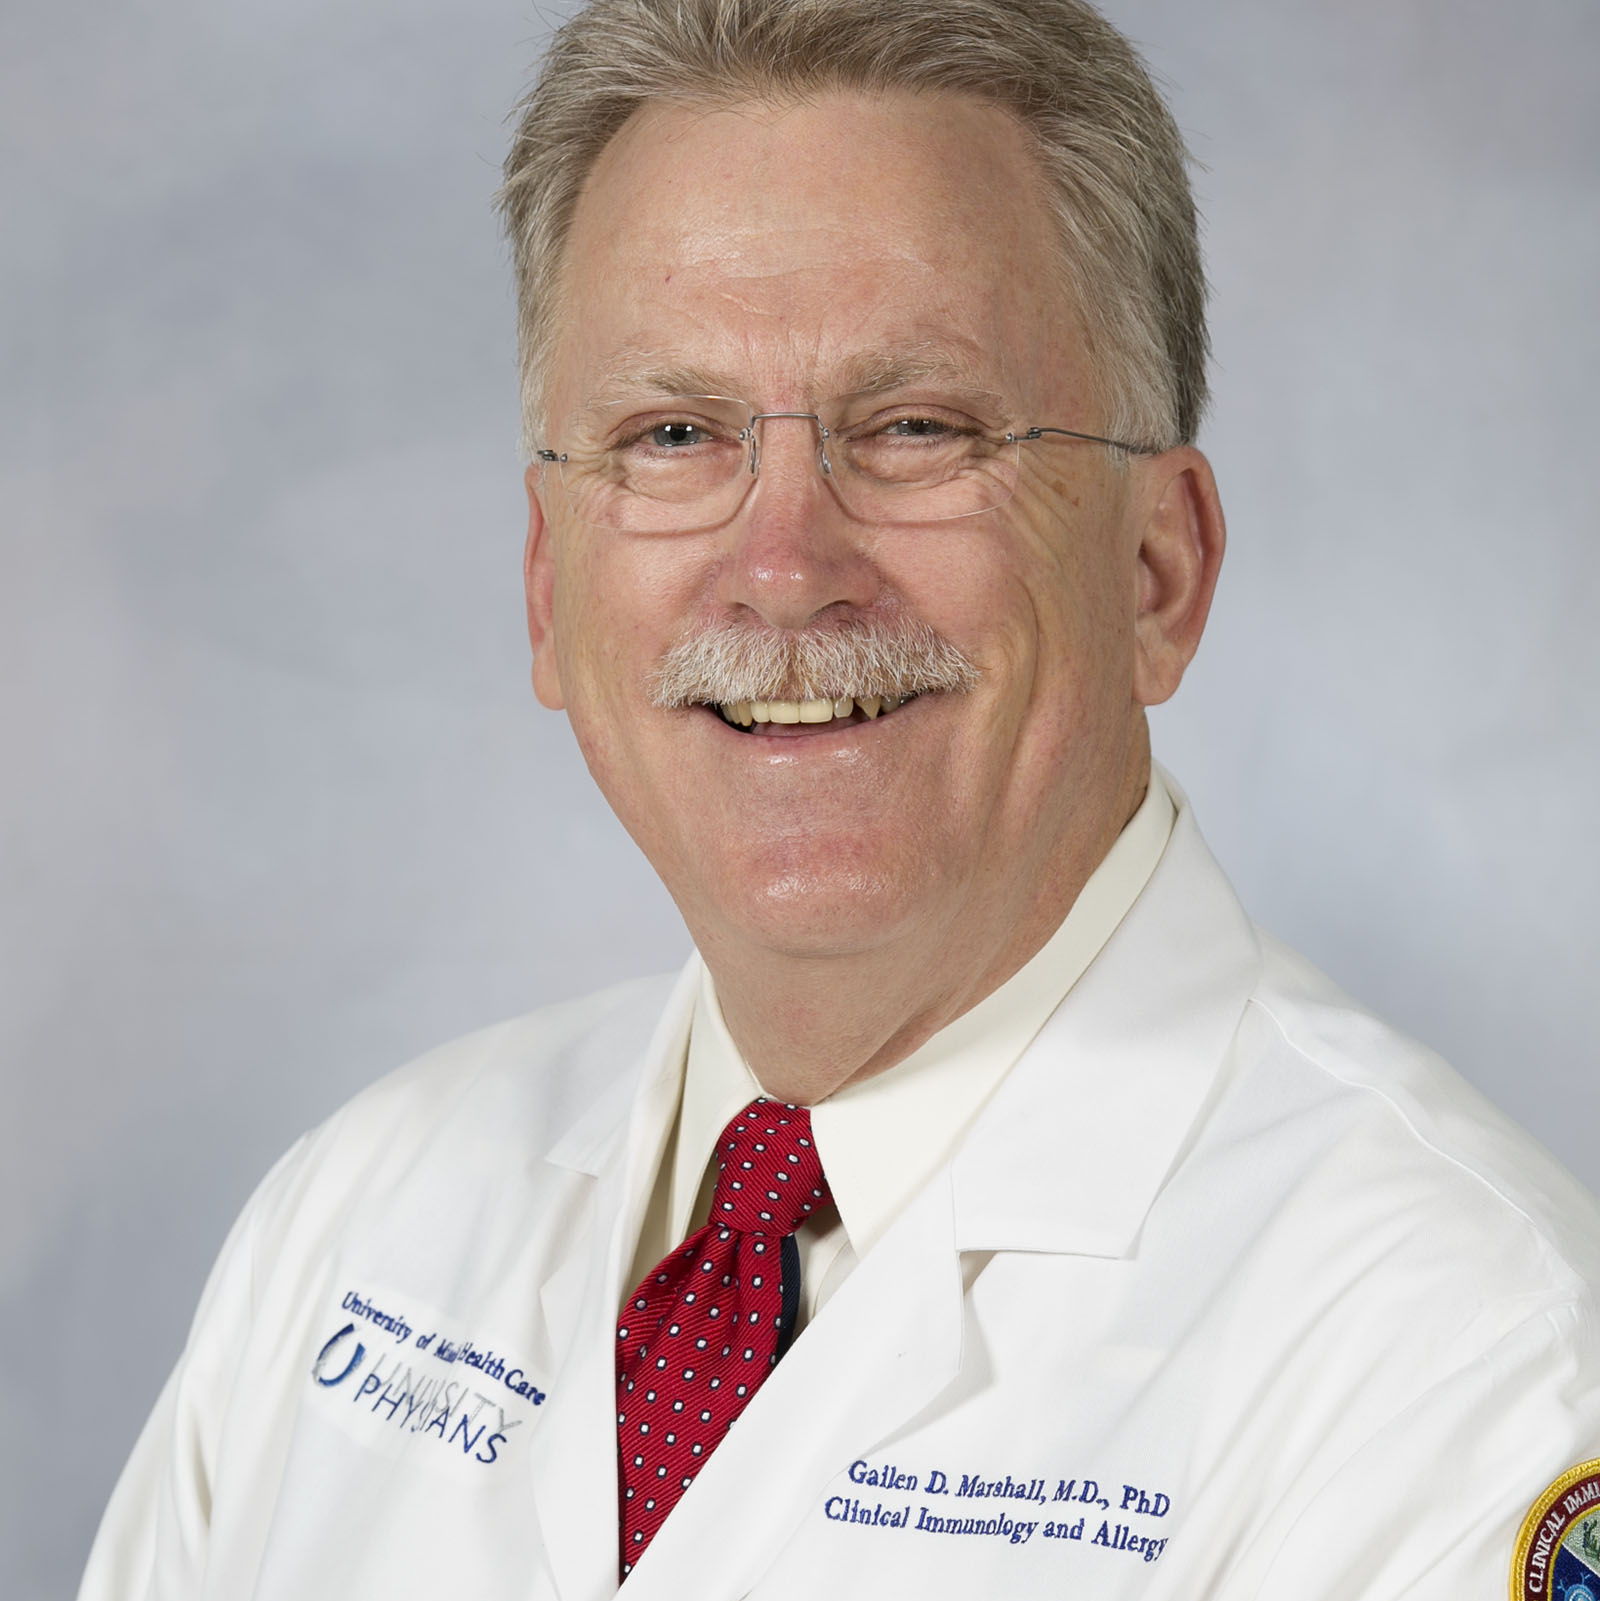 Dr. Gailen Daugherty Marshall MD, Allergist and Immunologist